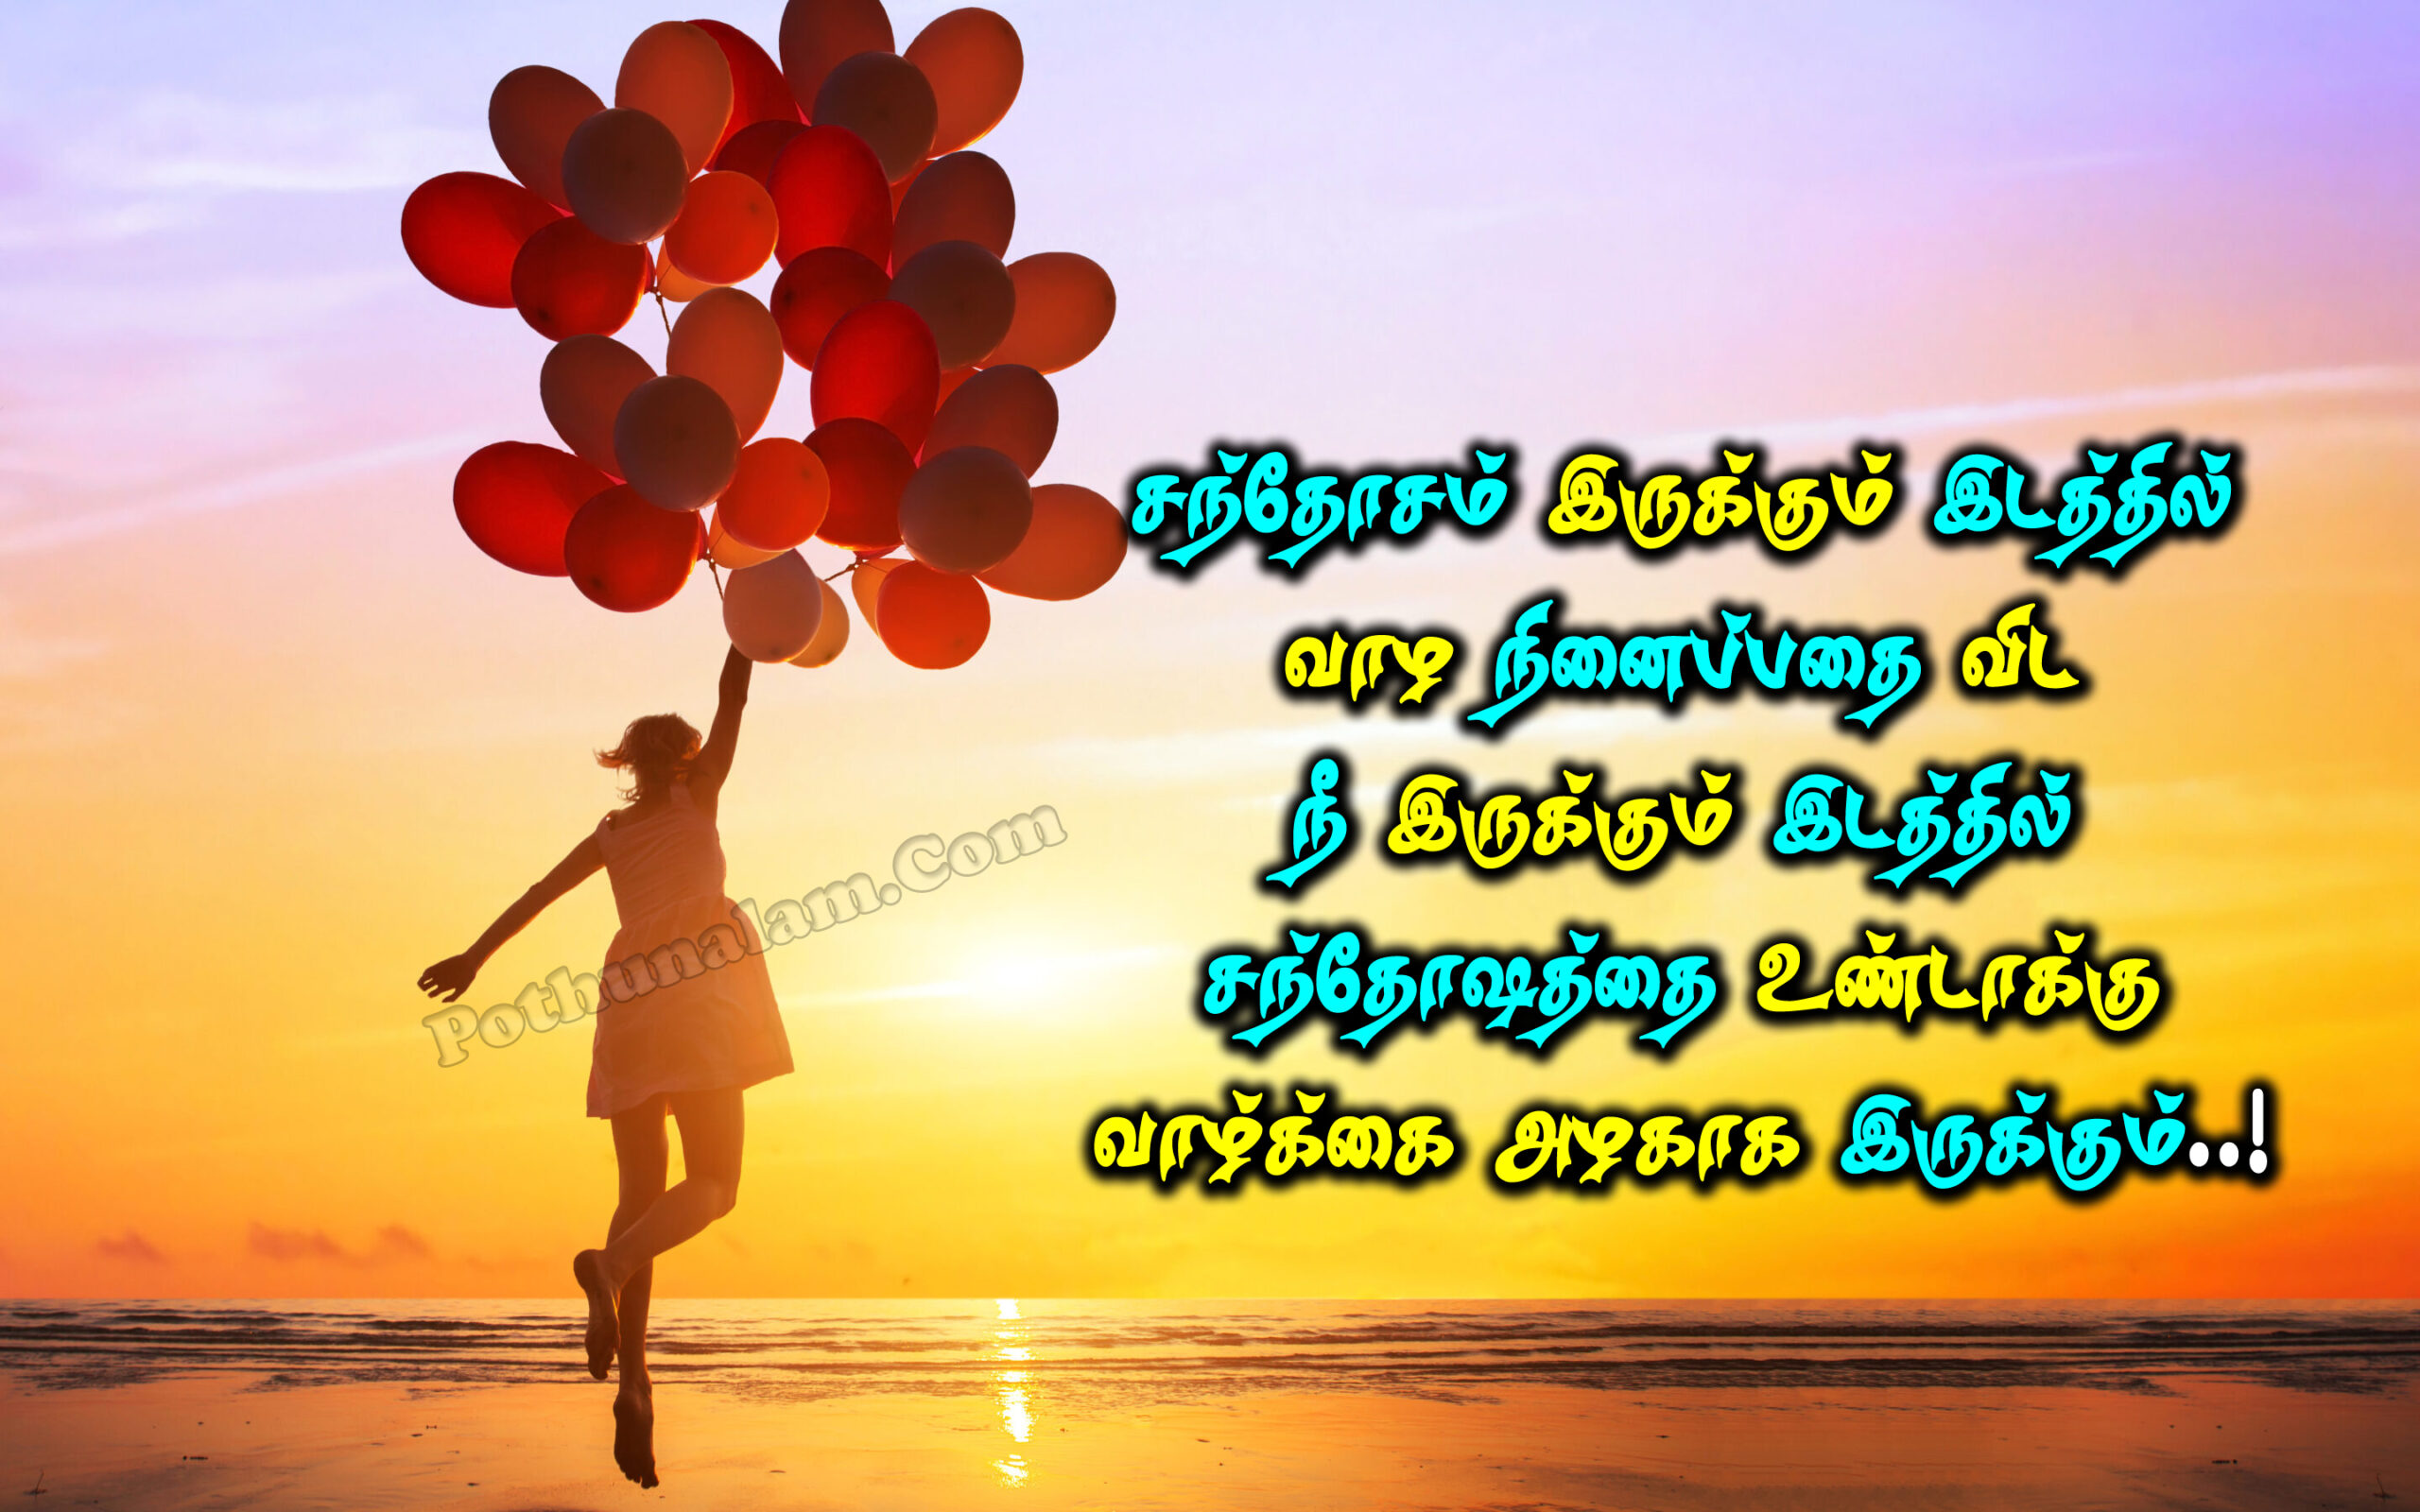 Tamil Happiness Quotes